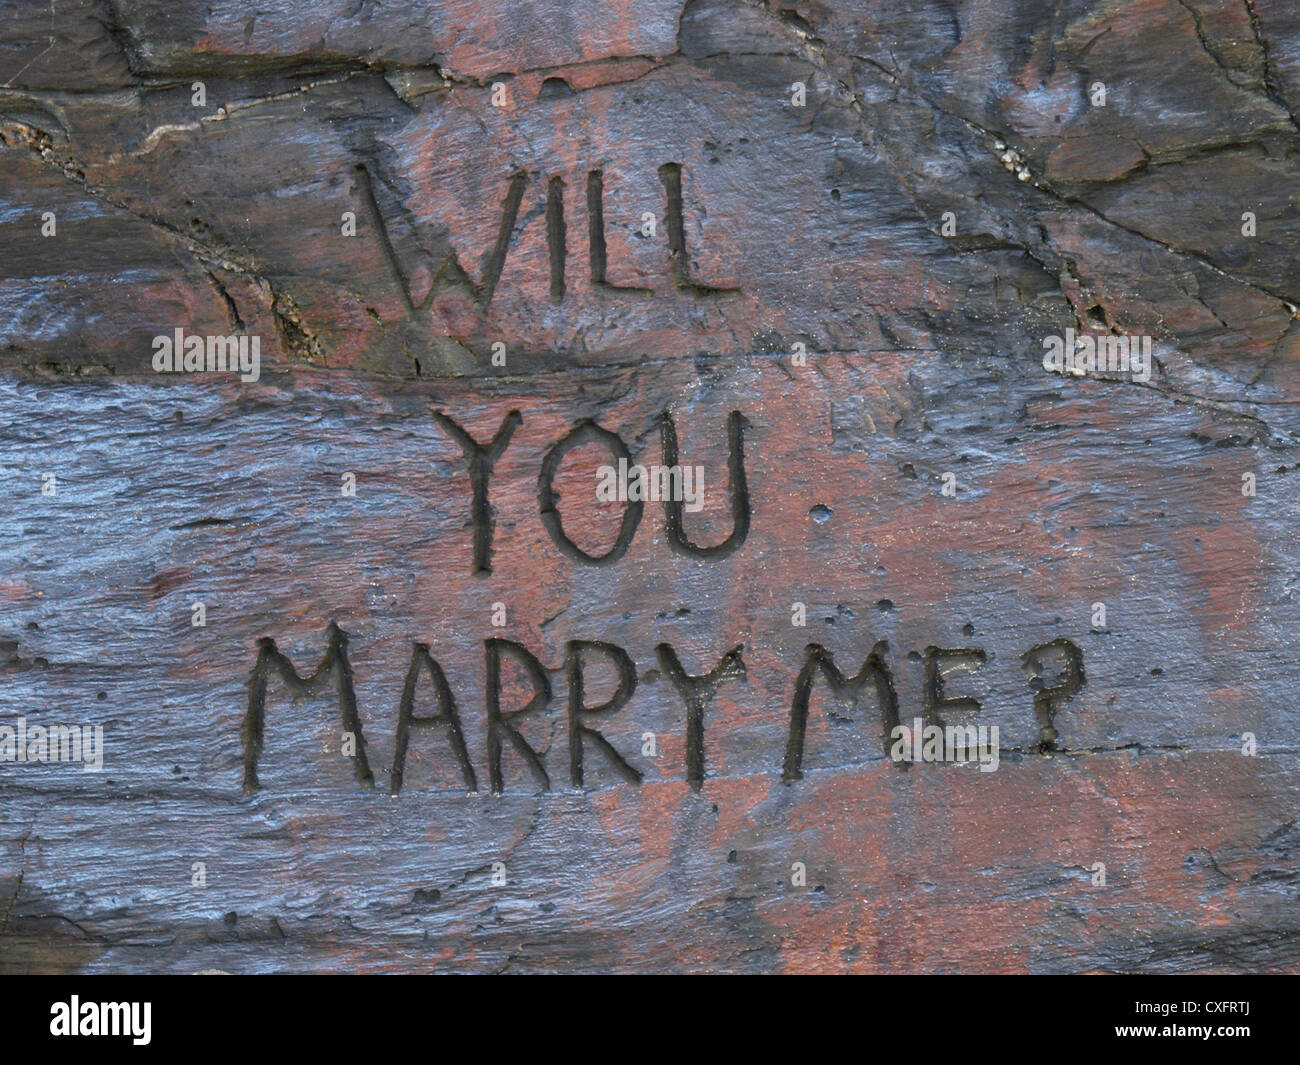 Will you marry me carved into the rock, Watergate Bay, Cornwall, UK Stock Photo